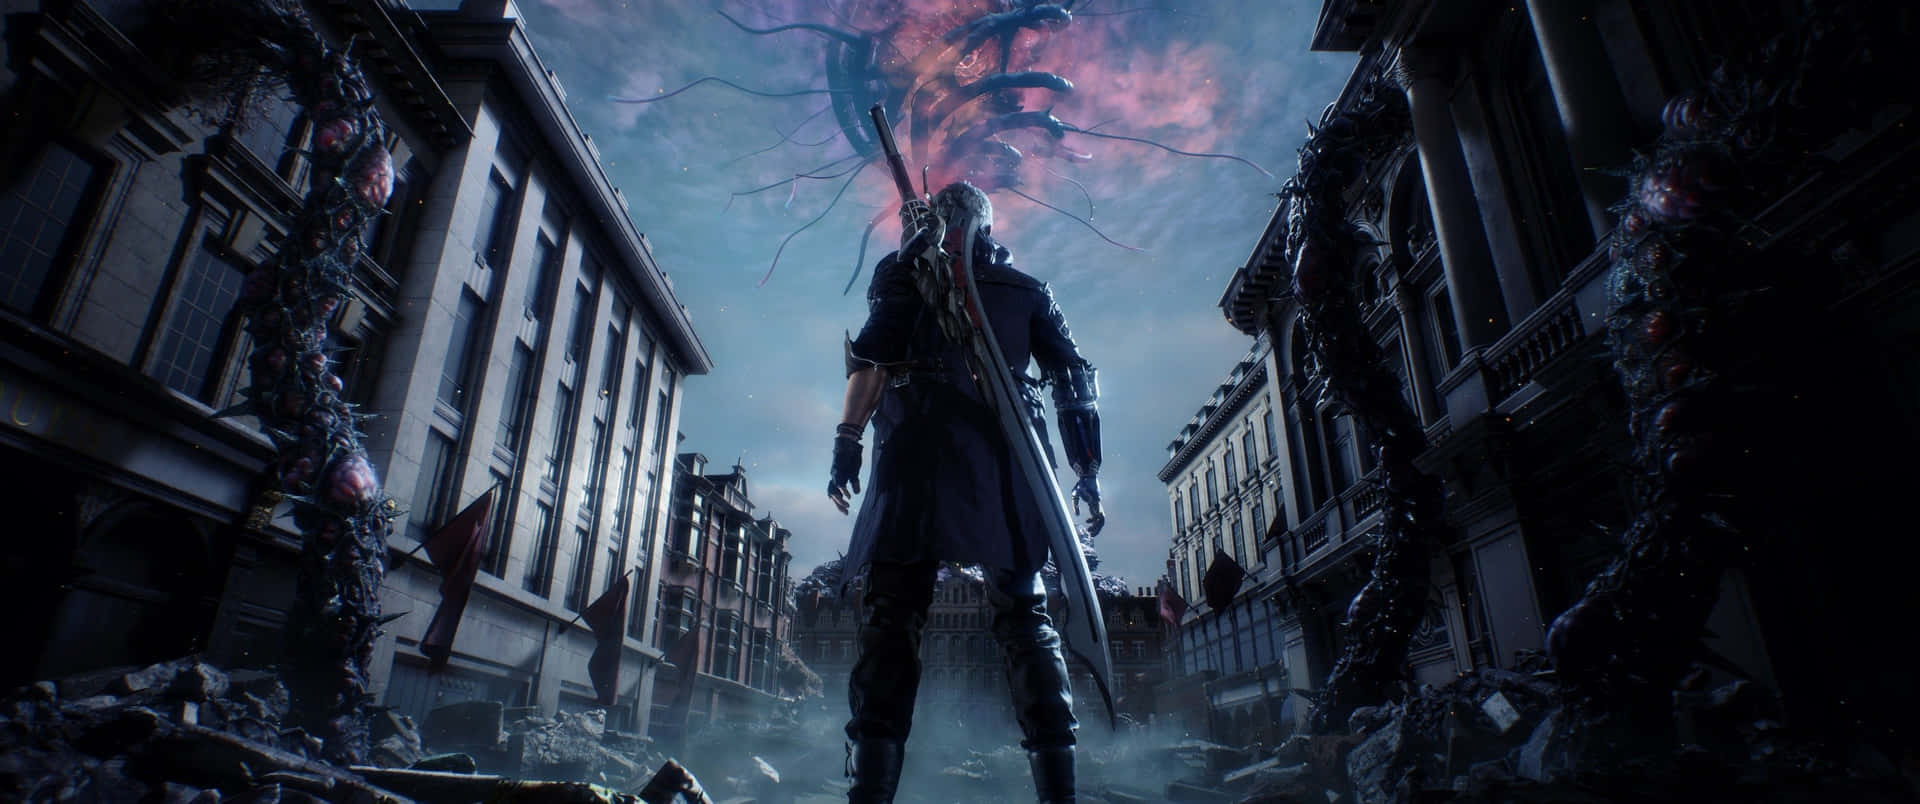 3440x1440 Game Devil May Cry 5 Wallpaper